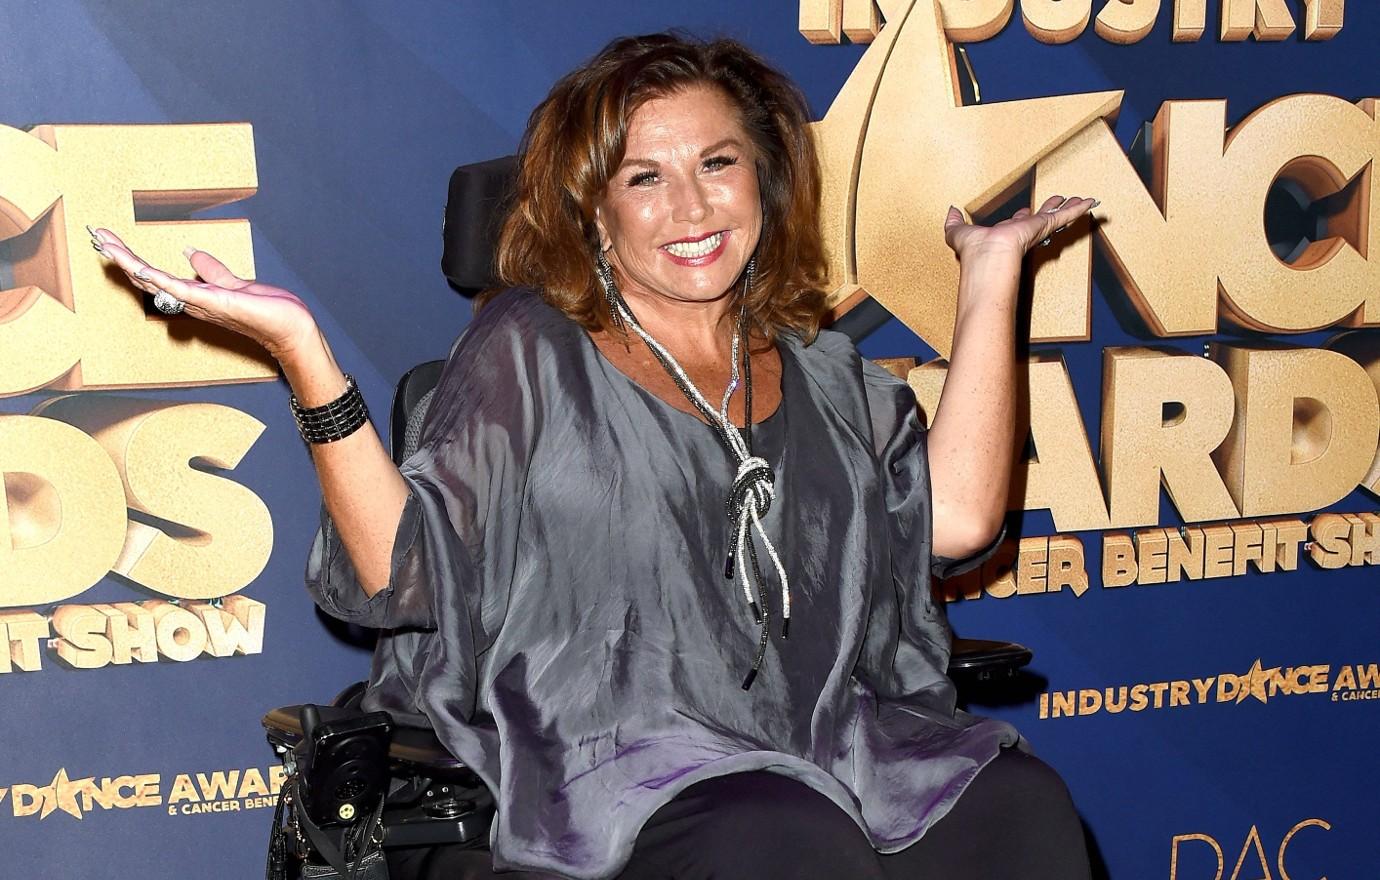 Abby Lee Miller speaks out about Cheryl Burke reportedly replacing